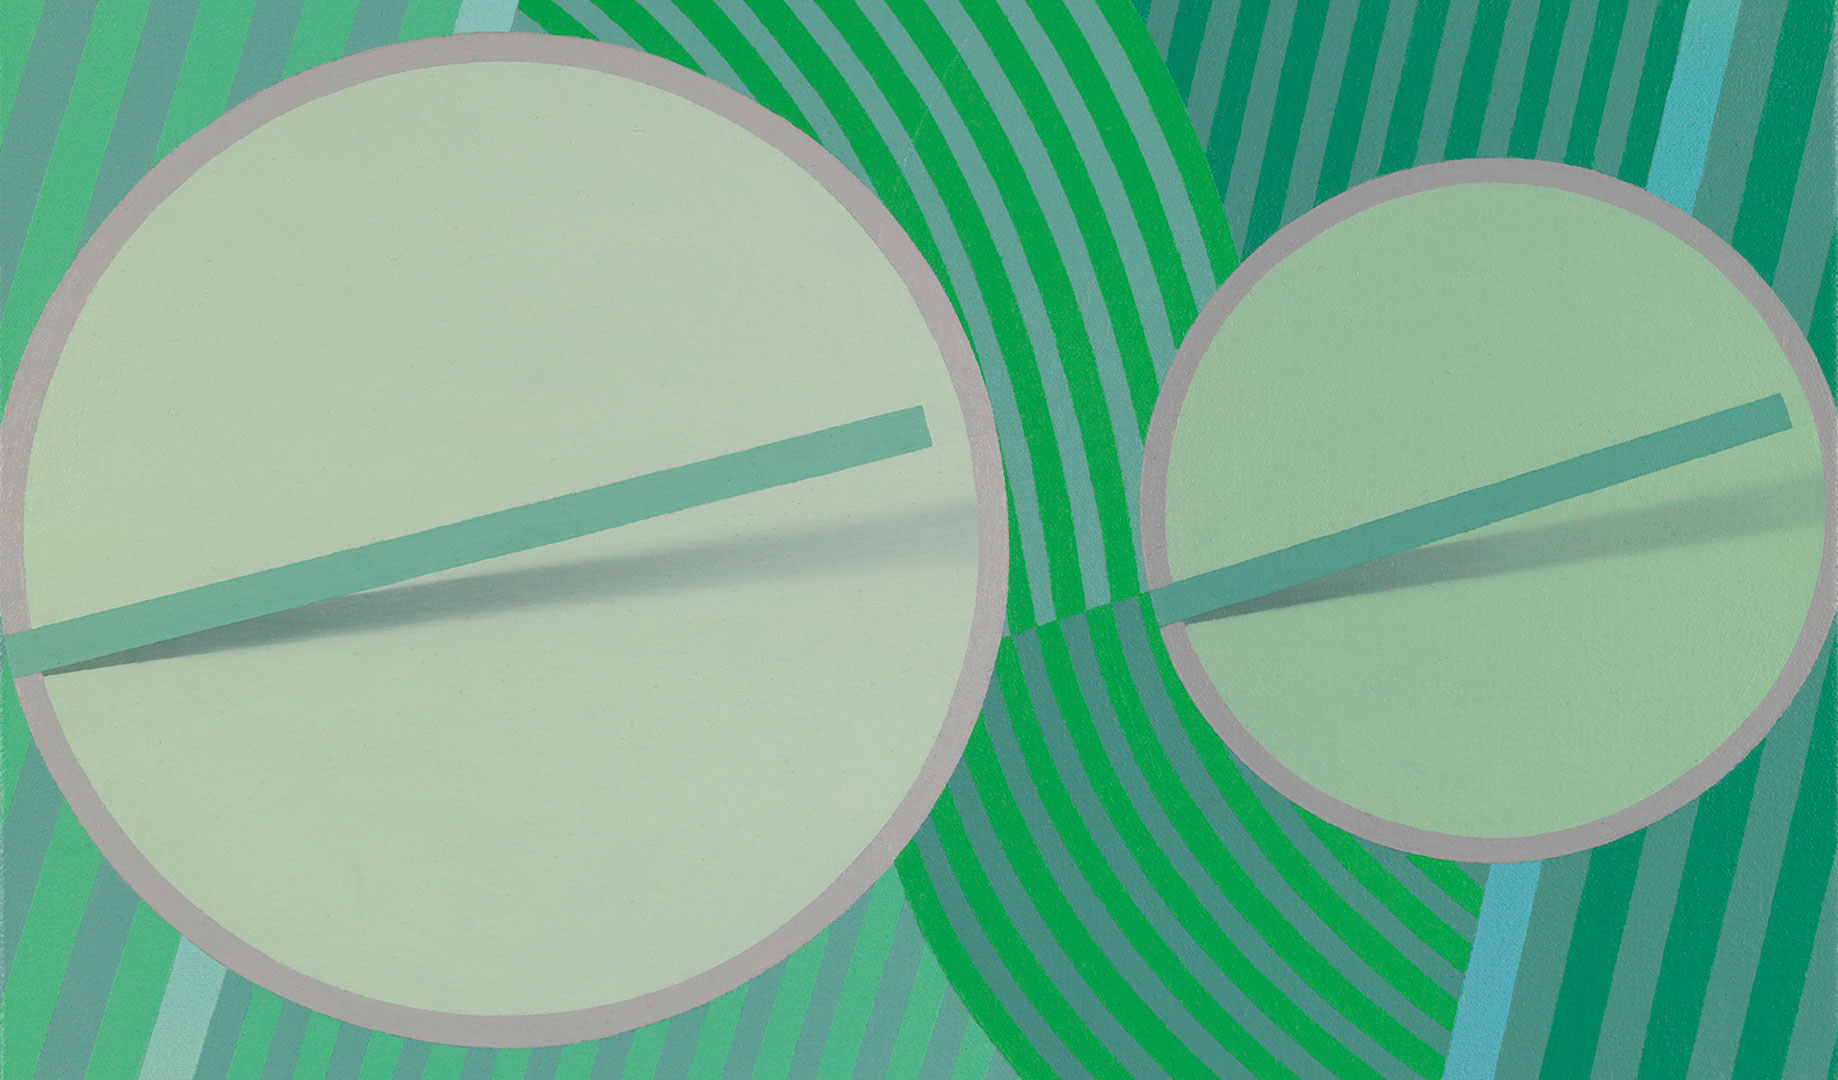 A detail from a painting by Tomma Abts, titled Schwiddo, dated 2008.